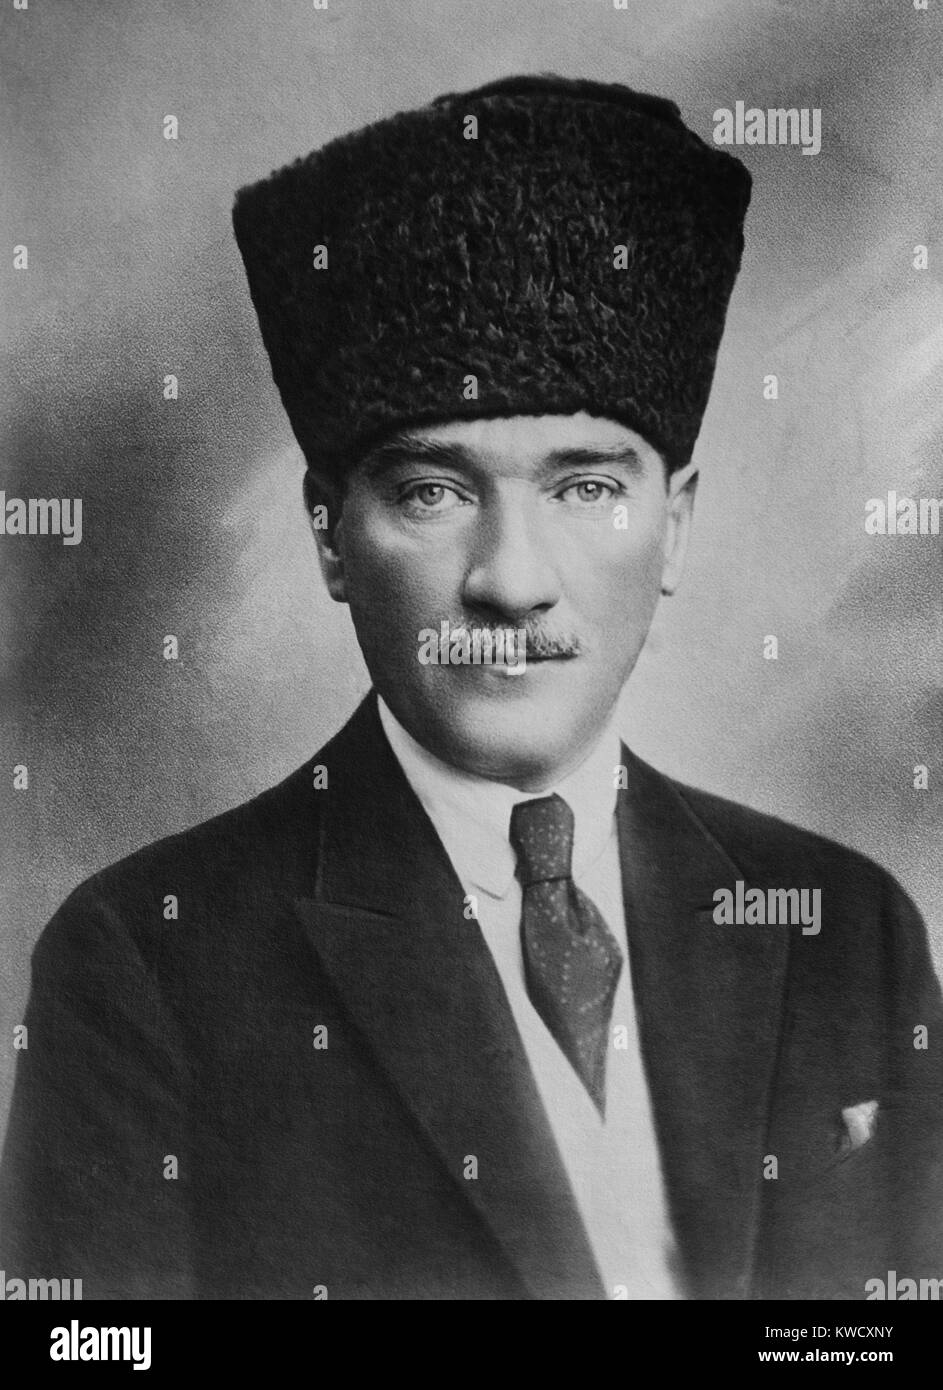 Mustafa Kemal Ataturk, President of Turkey, 1923-1938. He was a supporter of the 1908 Young Turk Revolution, a victorious General of the defense of Gallipoli in 1915, and led the Turkish National Movement in the Turkish War of Independence, 1920-1922 (BSLOC 2017 1 114) Stock Photo